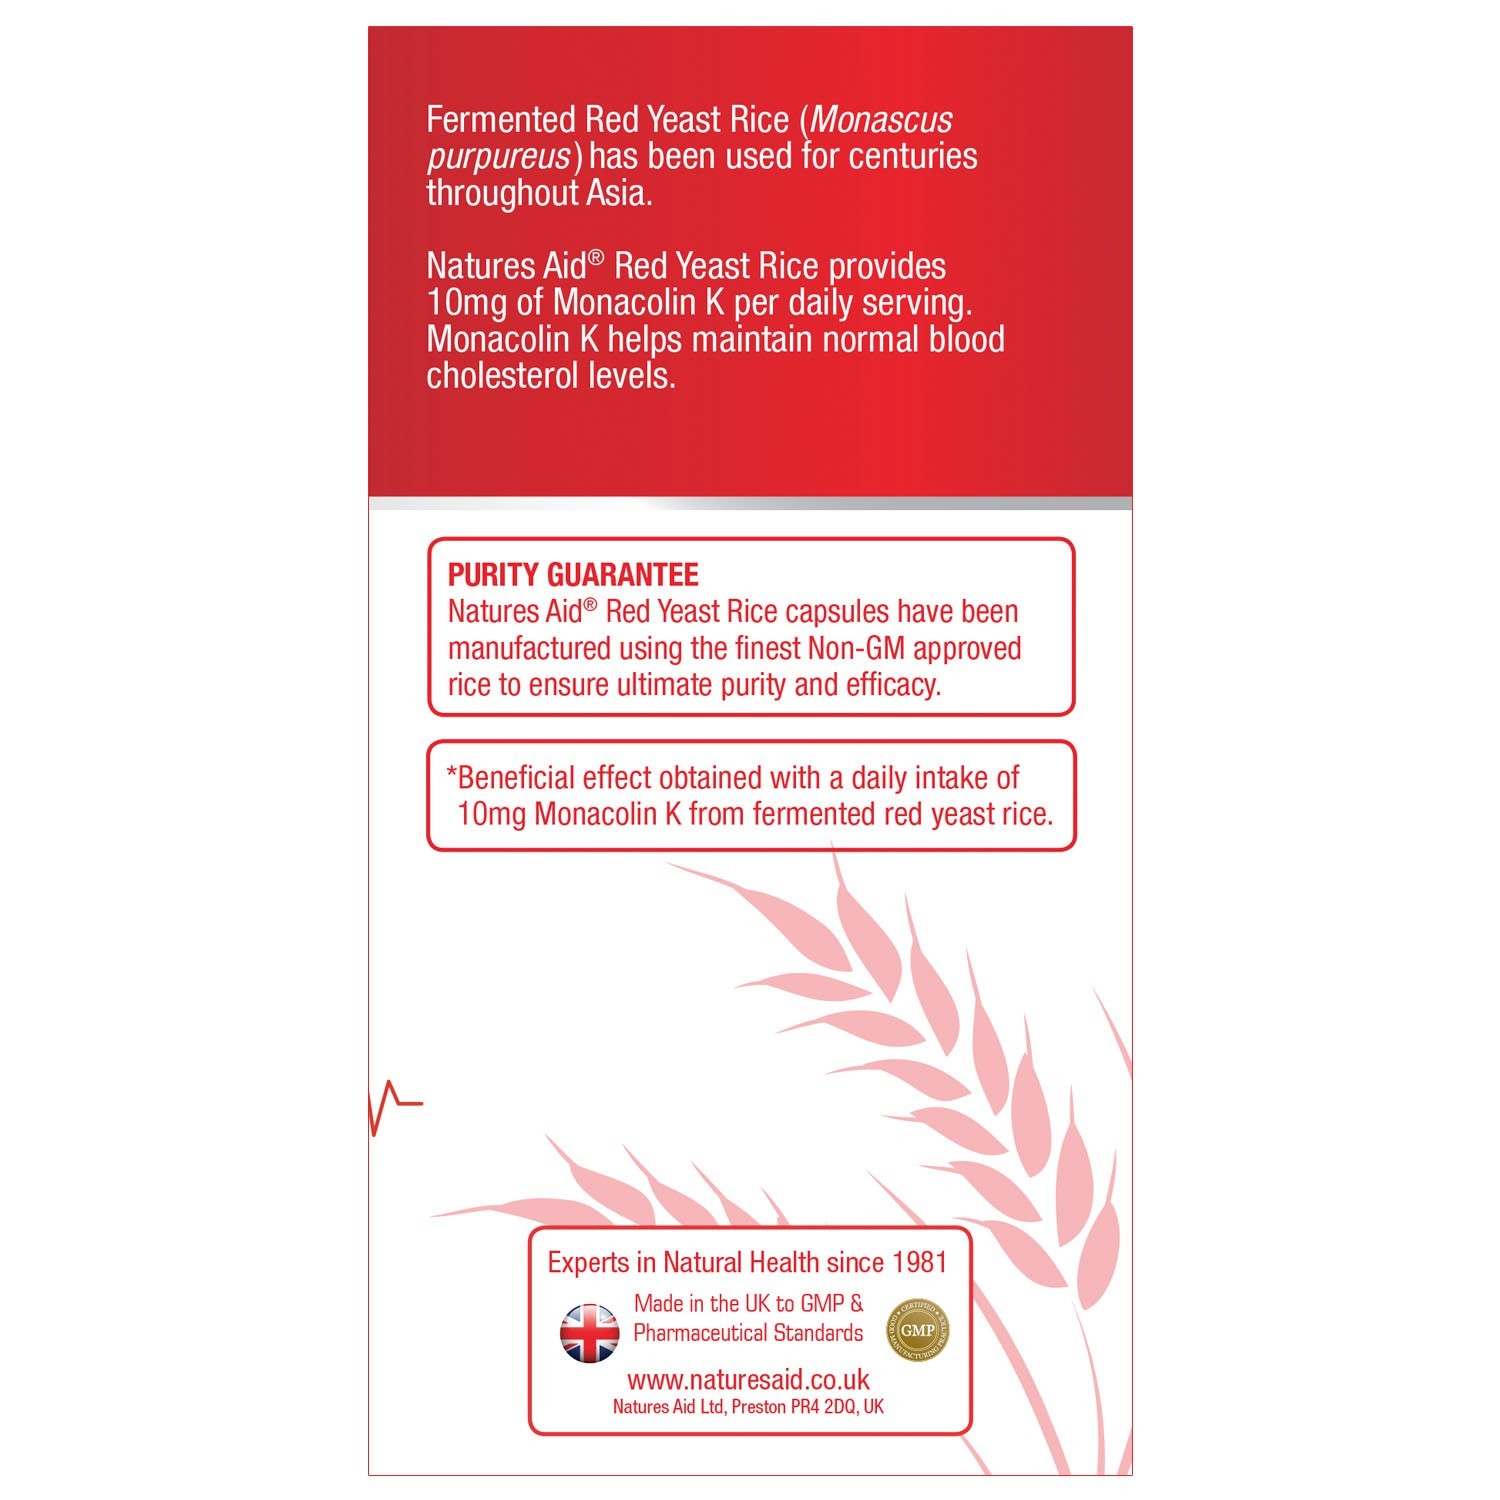 Natures Aid Red Yeast Rice 333mg